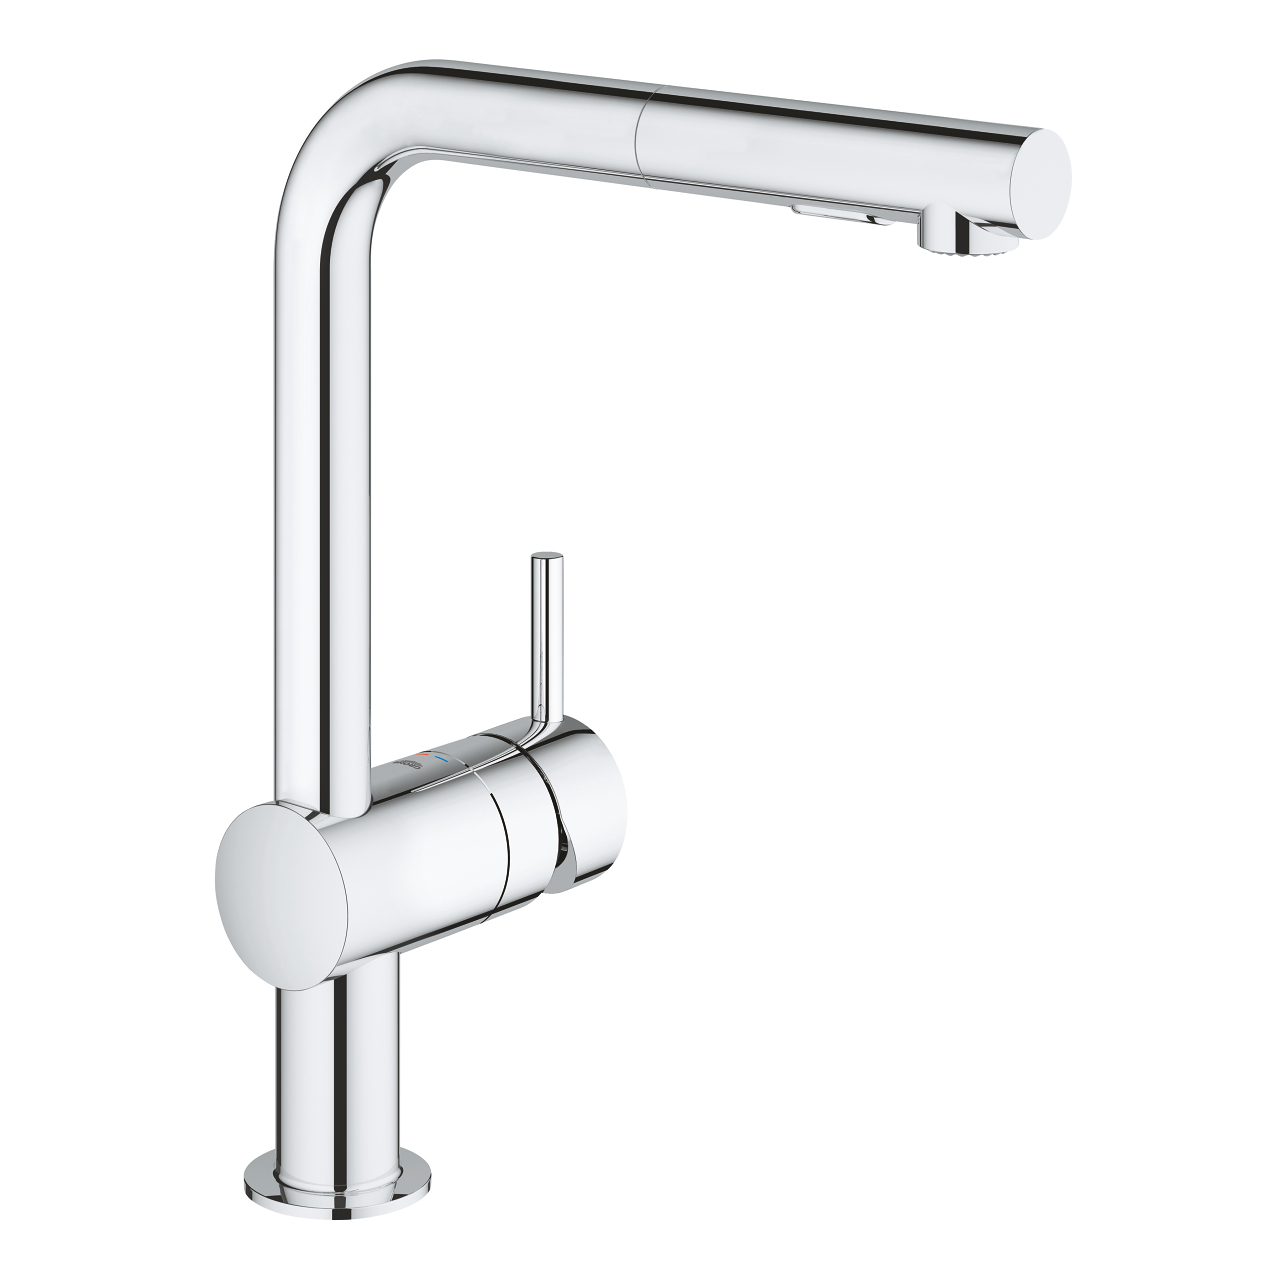 Baterie bucatarie Grohe Minta cu dus extractibil dual spray pipa L levier scurt crom baterie